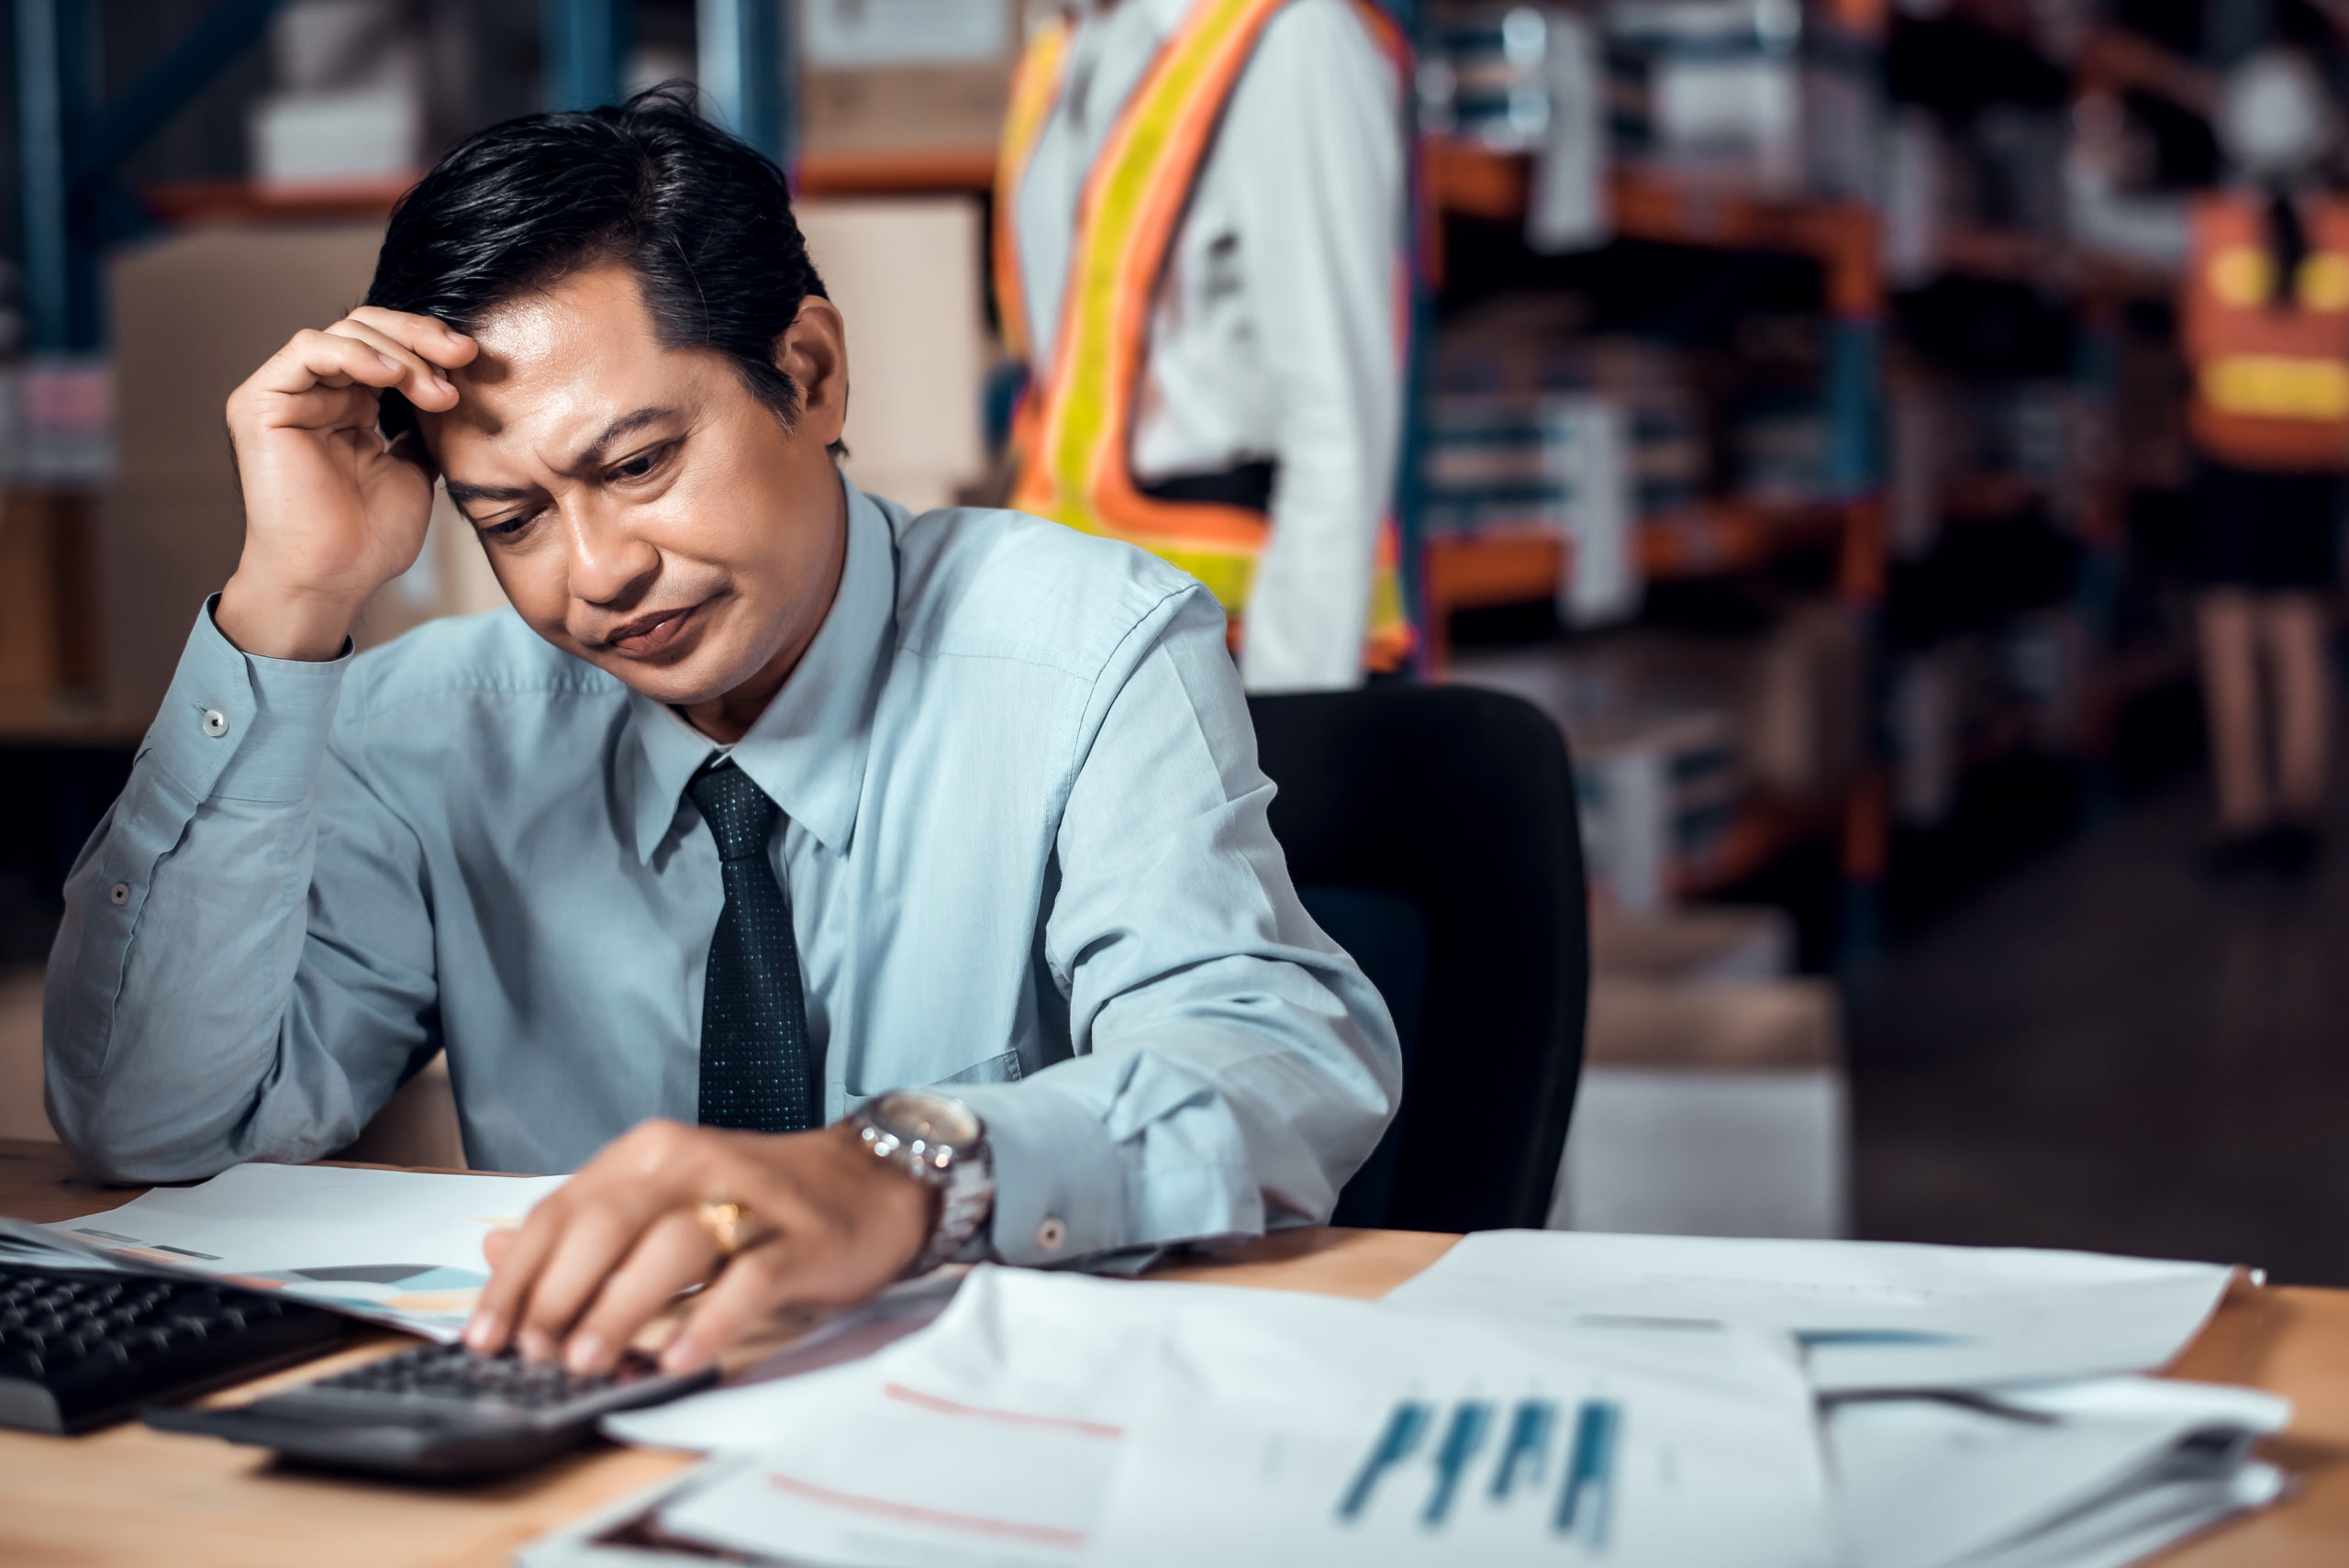 stressed worker due to lack of inventory management software solutions with rfid